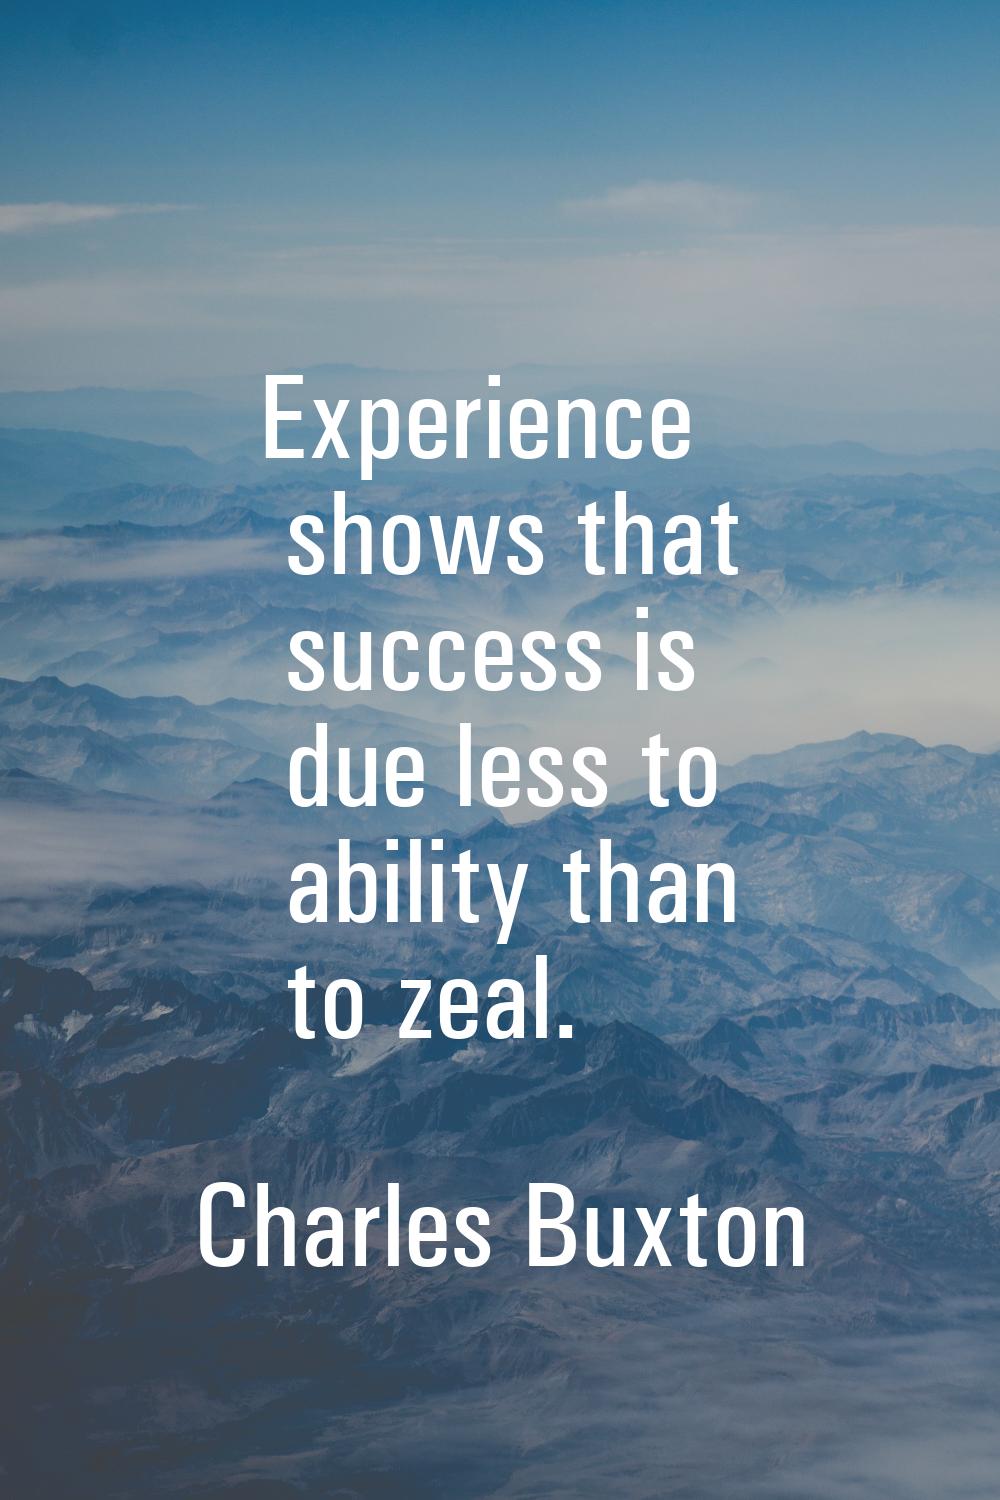 Experience shows that success is due less to ability than to zeal.